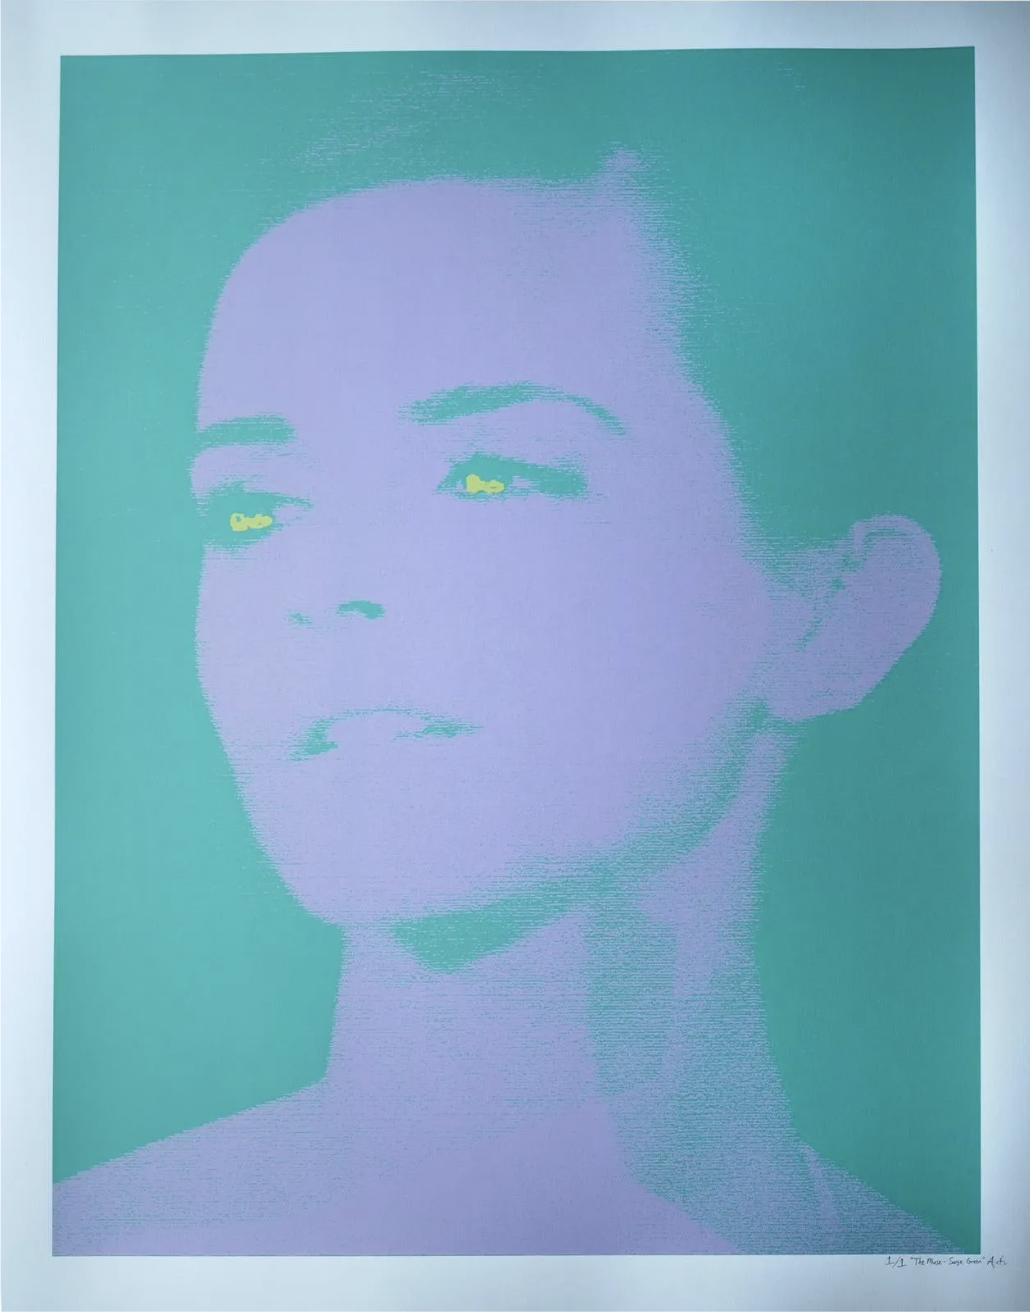 A faded two-tone image of a woman with bright eyes.